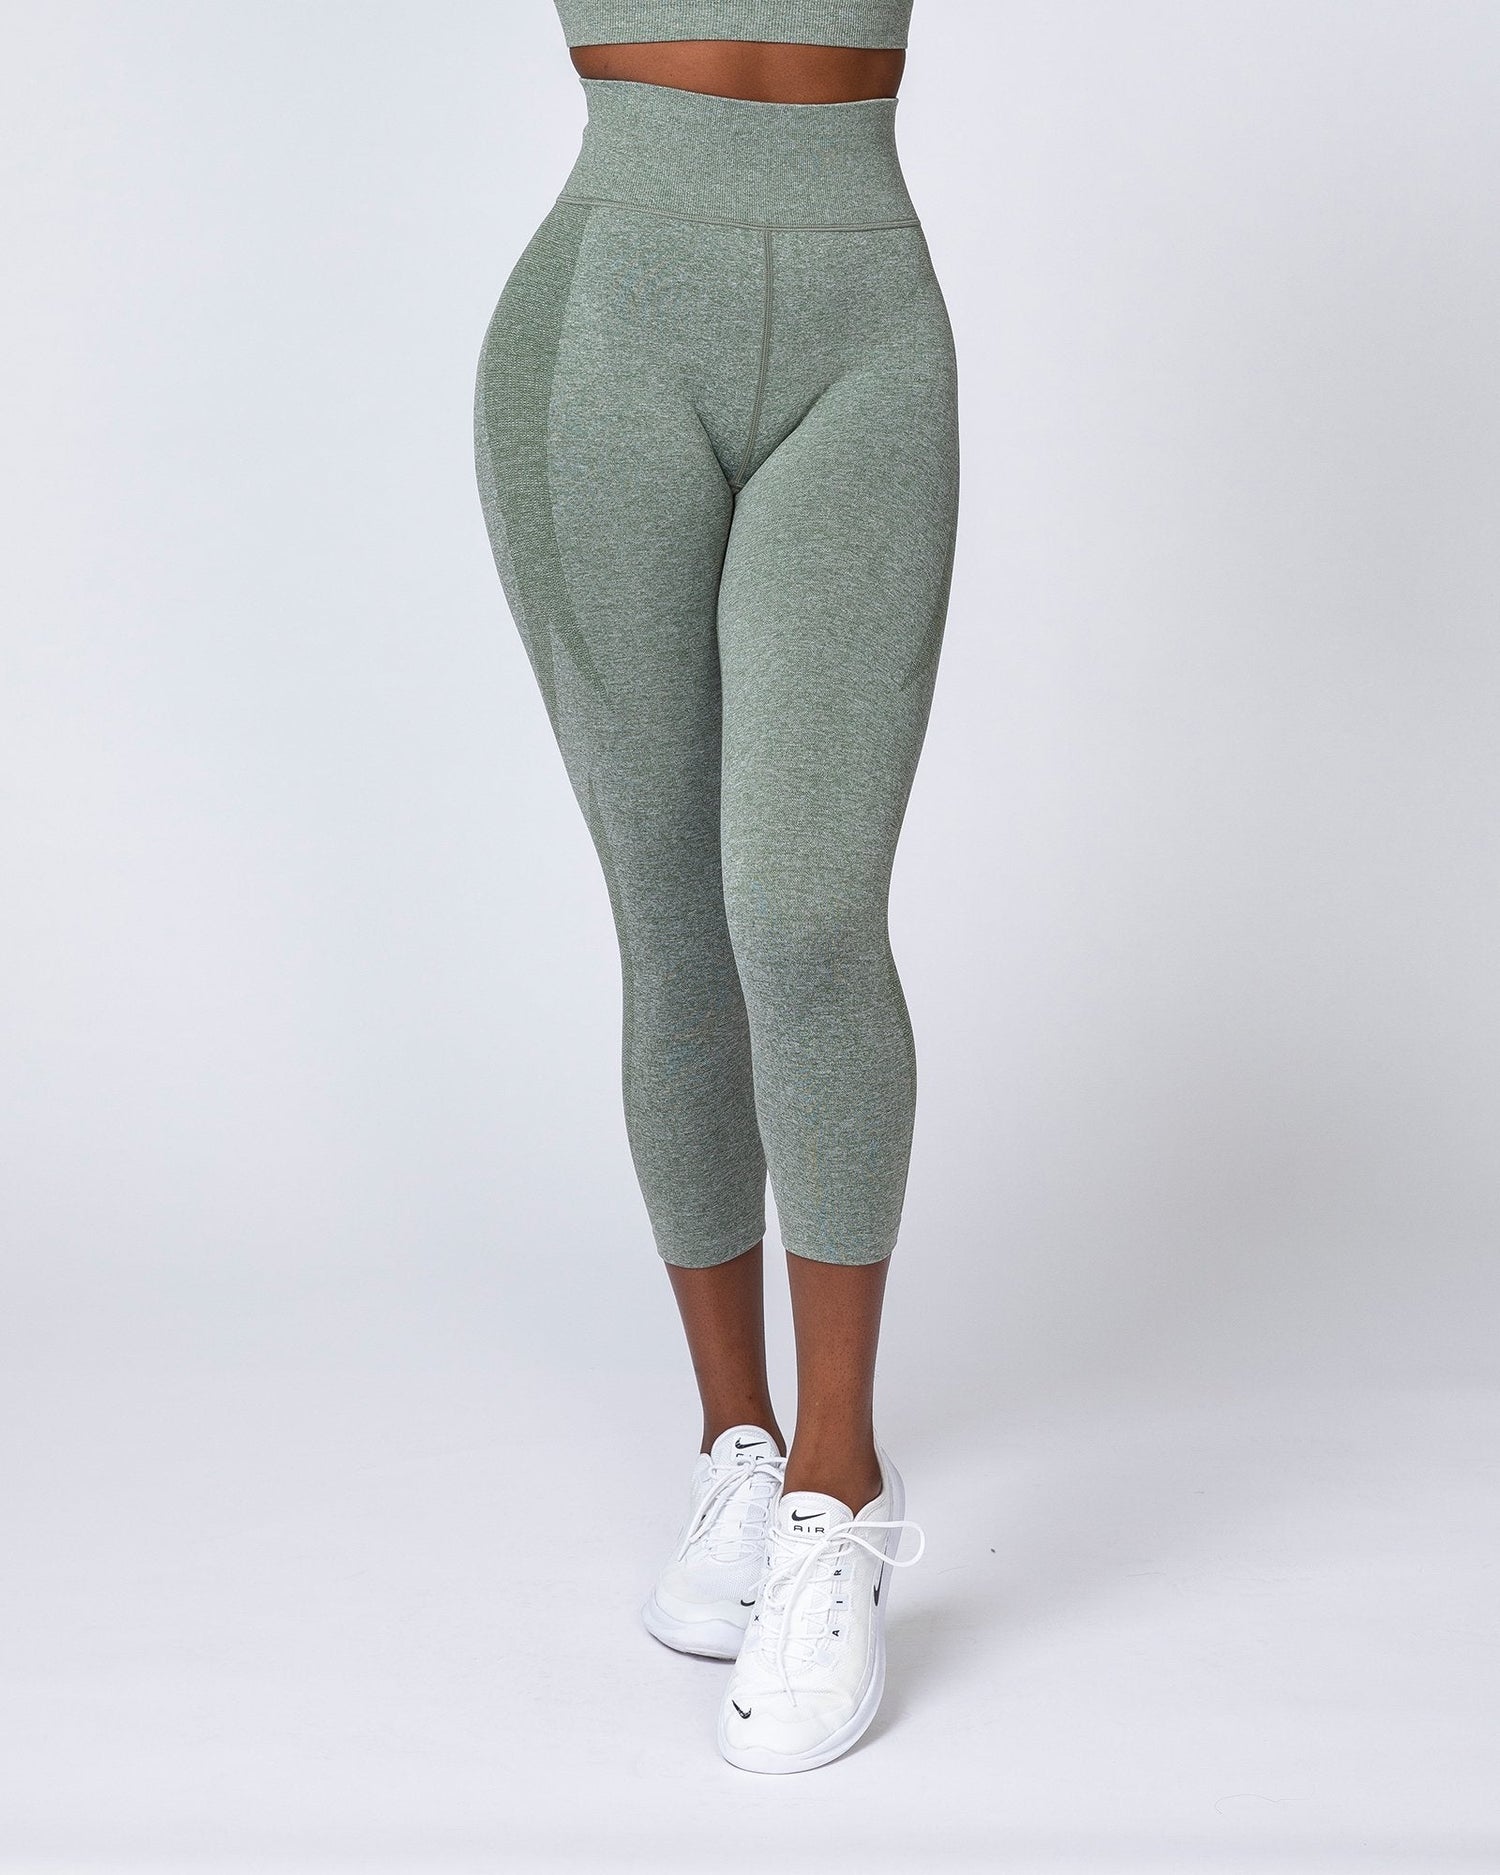 Gymshark Womens Gray Fit Seamless Leggings With Green Waistband Size XS/S  No Tag